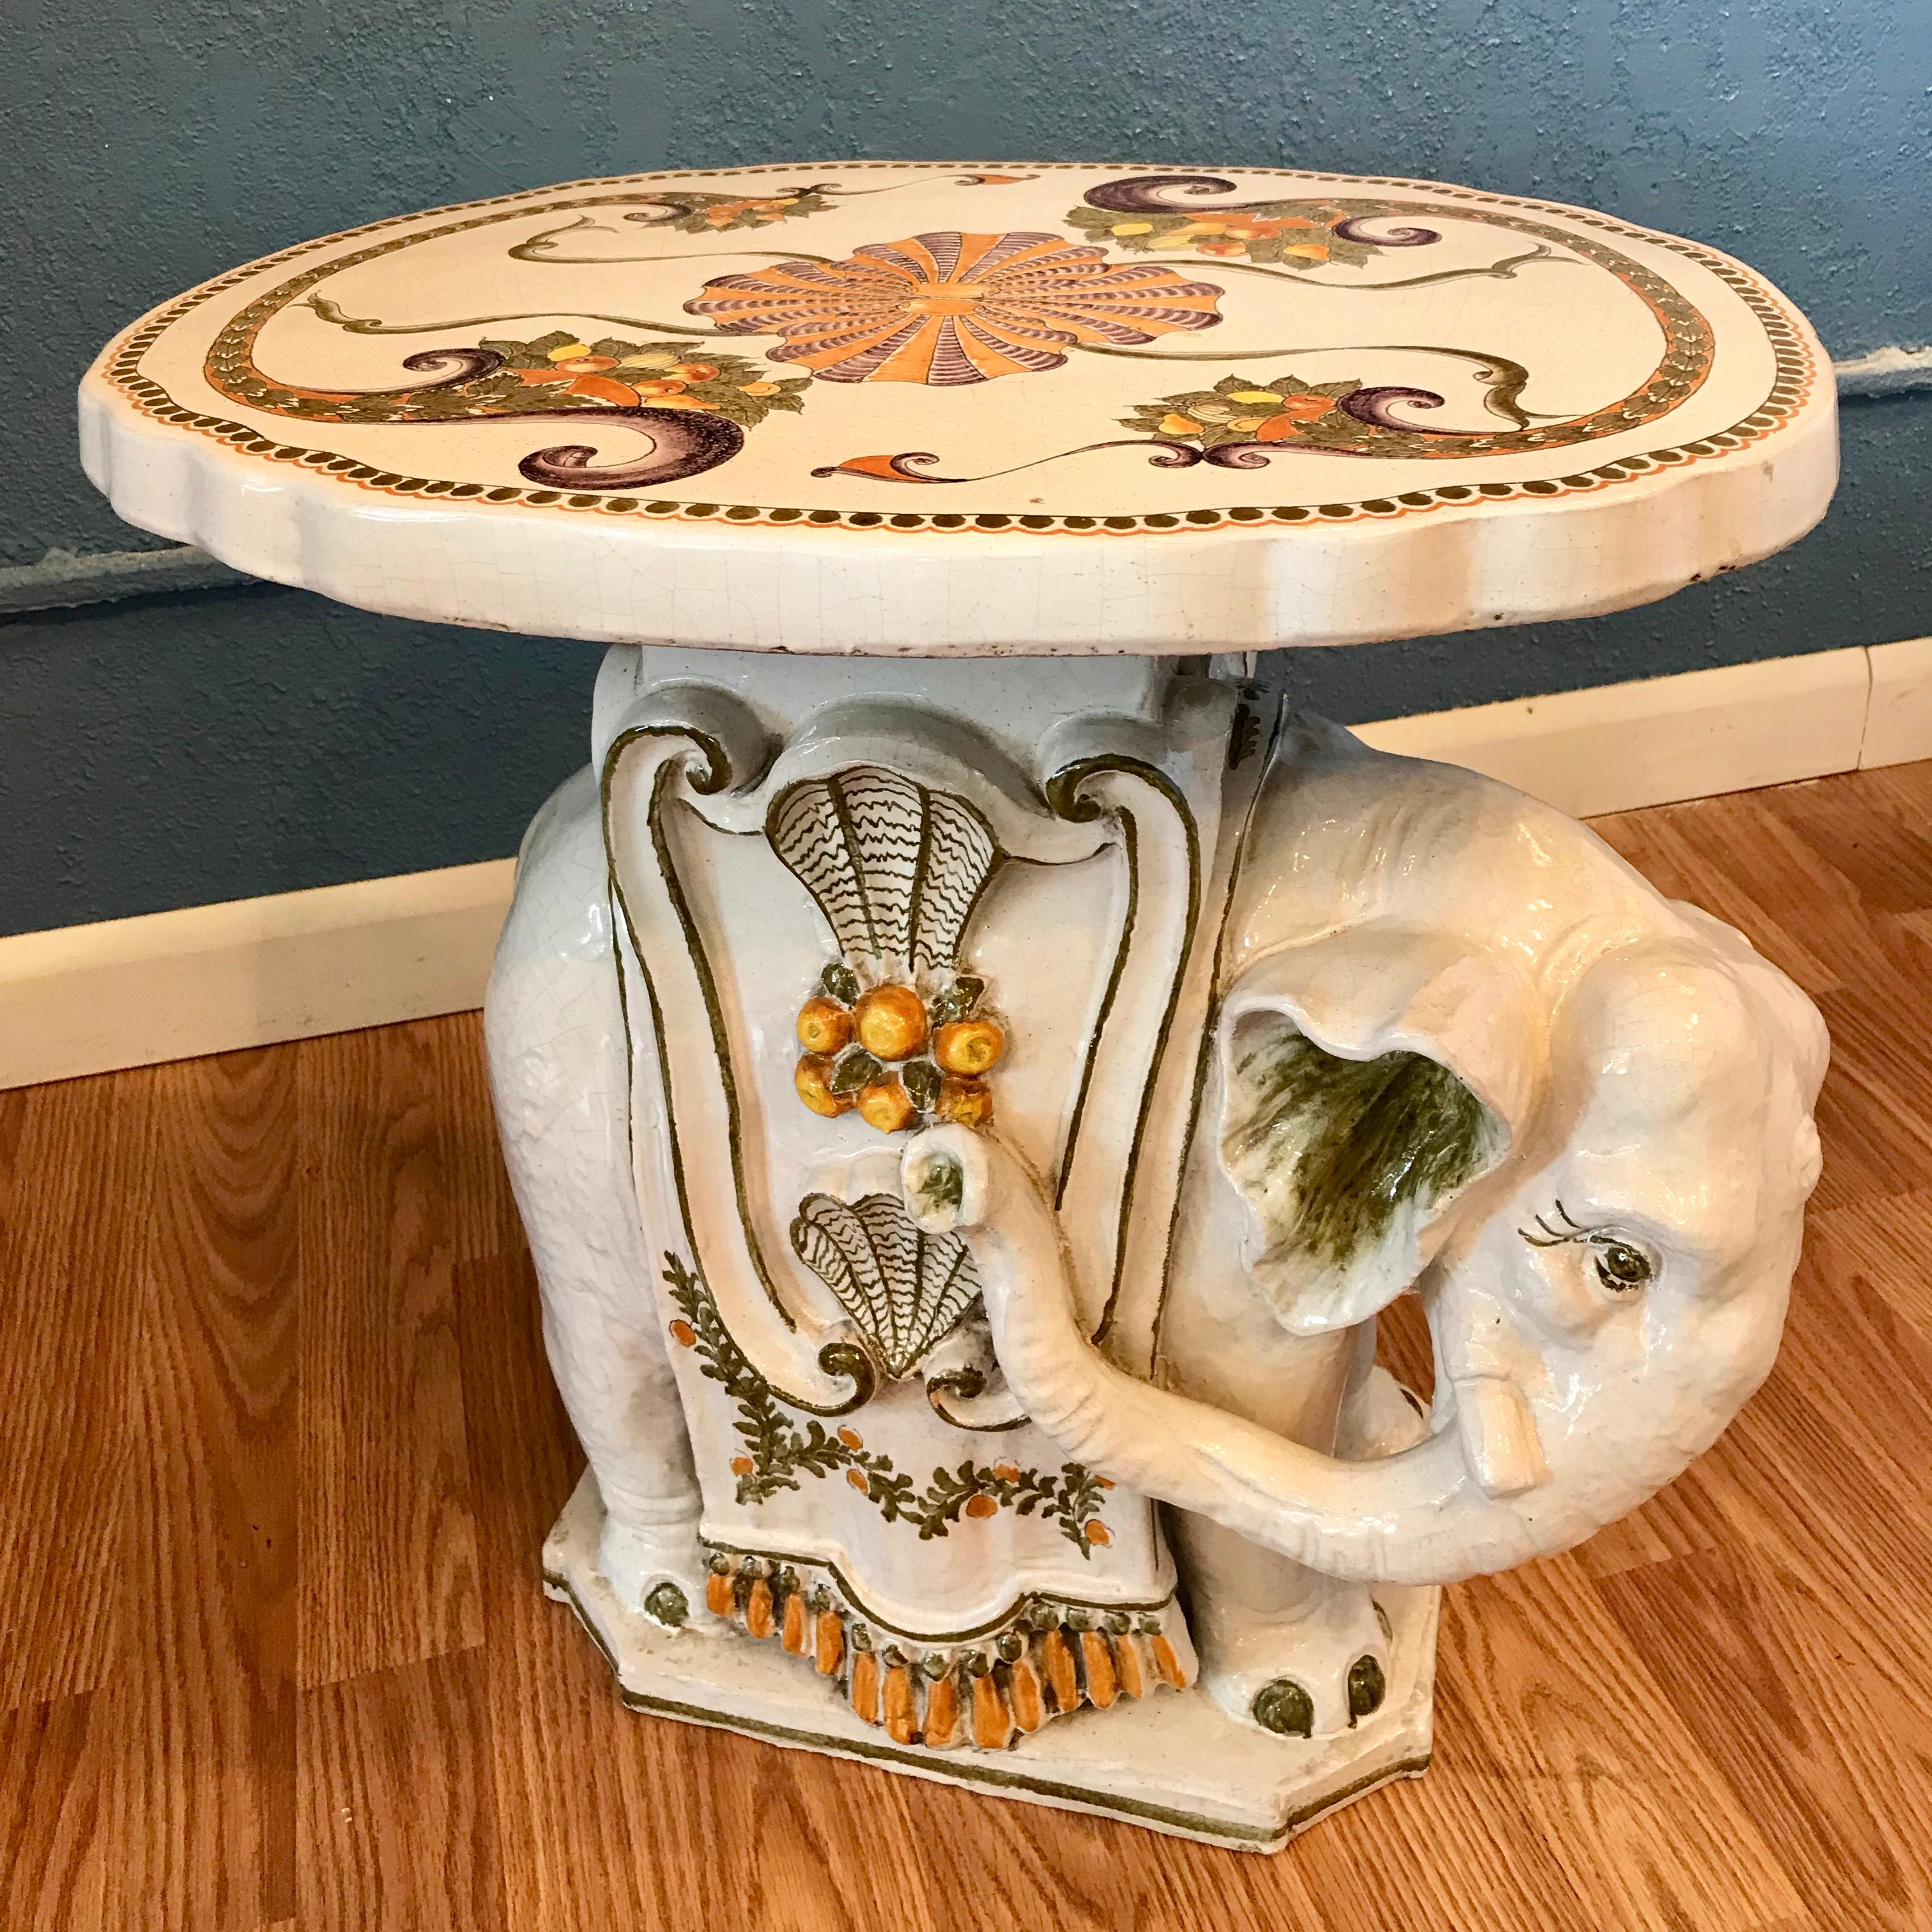 A fanciful table, the elephant is posed with his trunk curled up to its side.
The top is hand painted and decorated with cornucopia.
Table top measures 15